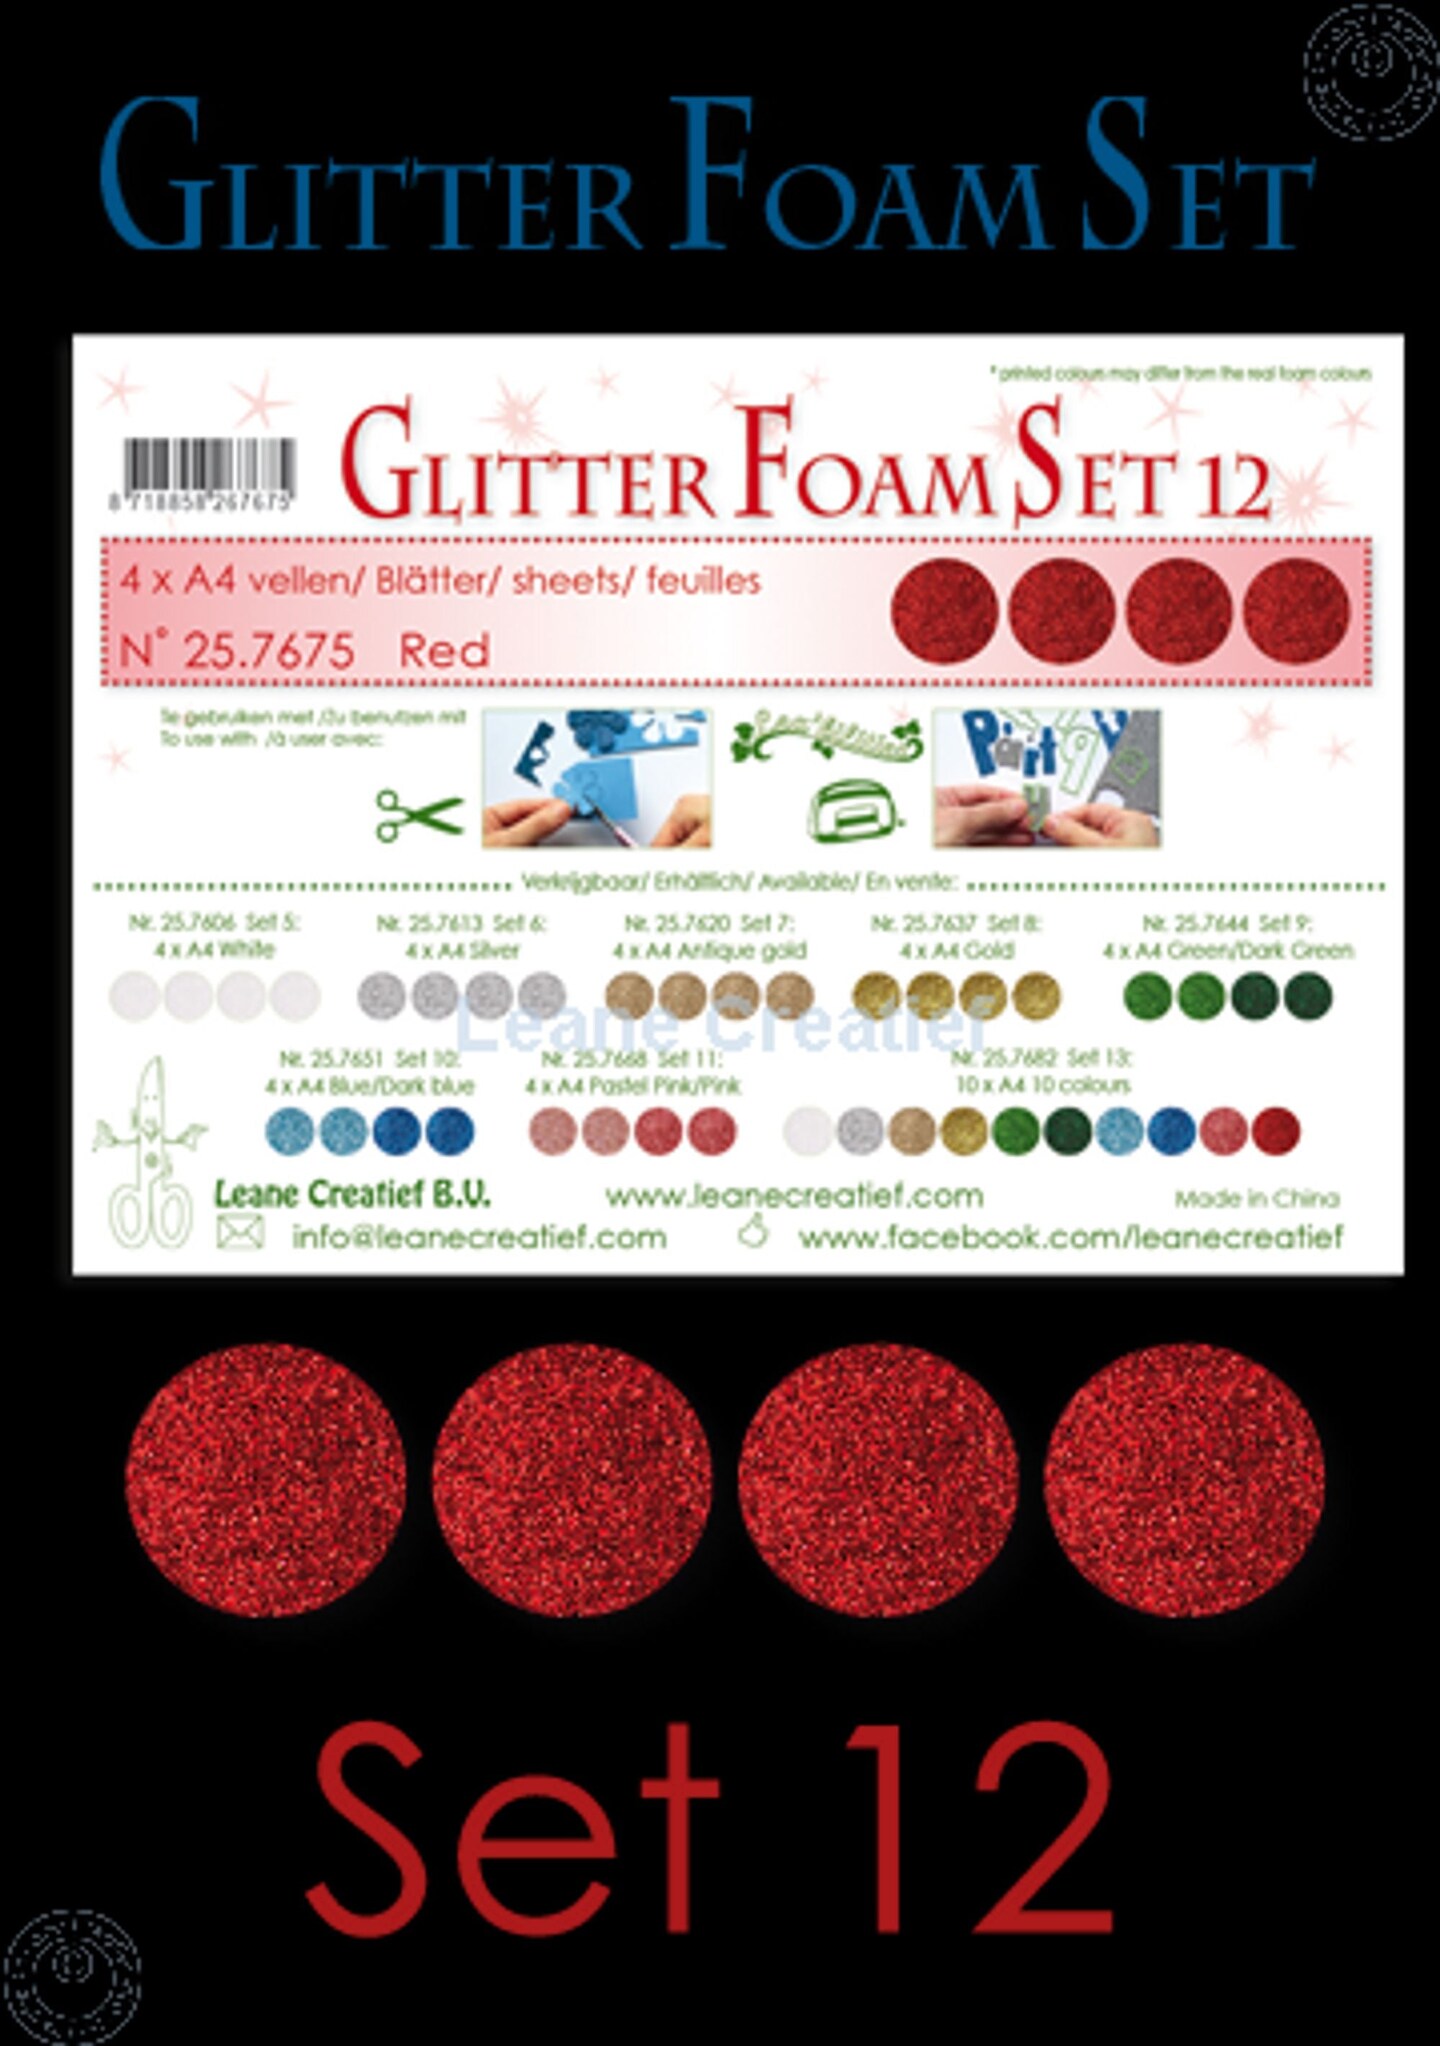 12 Packs: 150 ct. (1,800 total) Glitter Star Foam Stickers by Creatology™